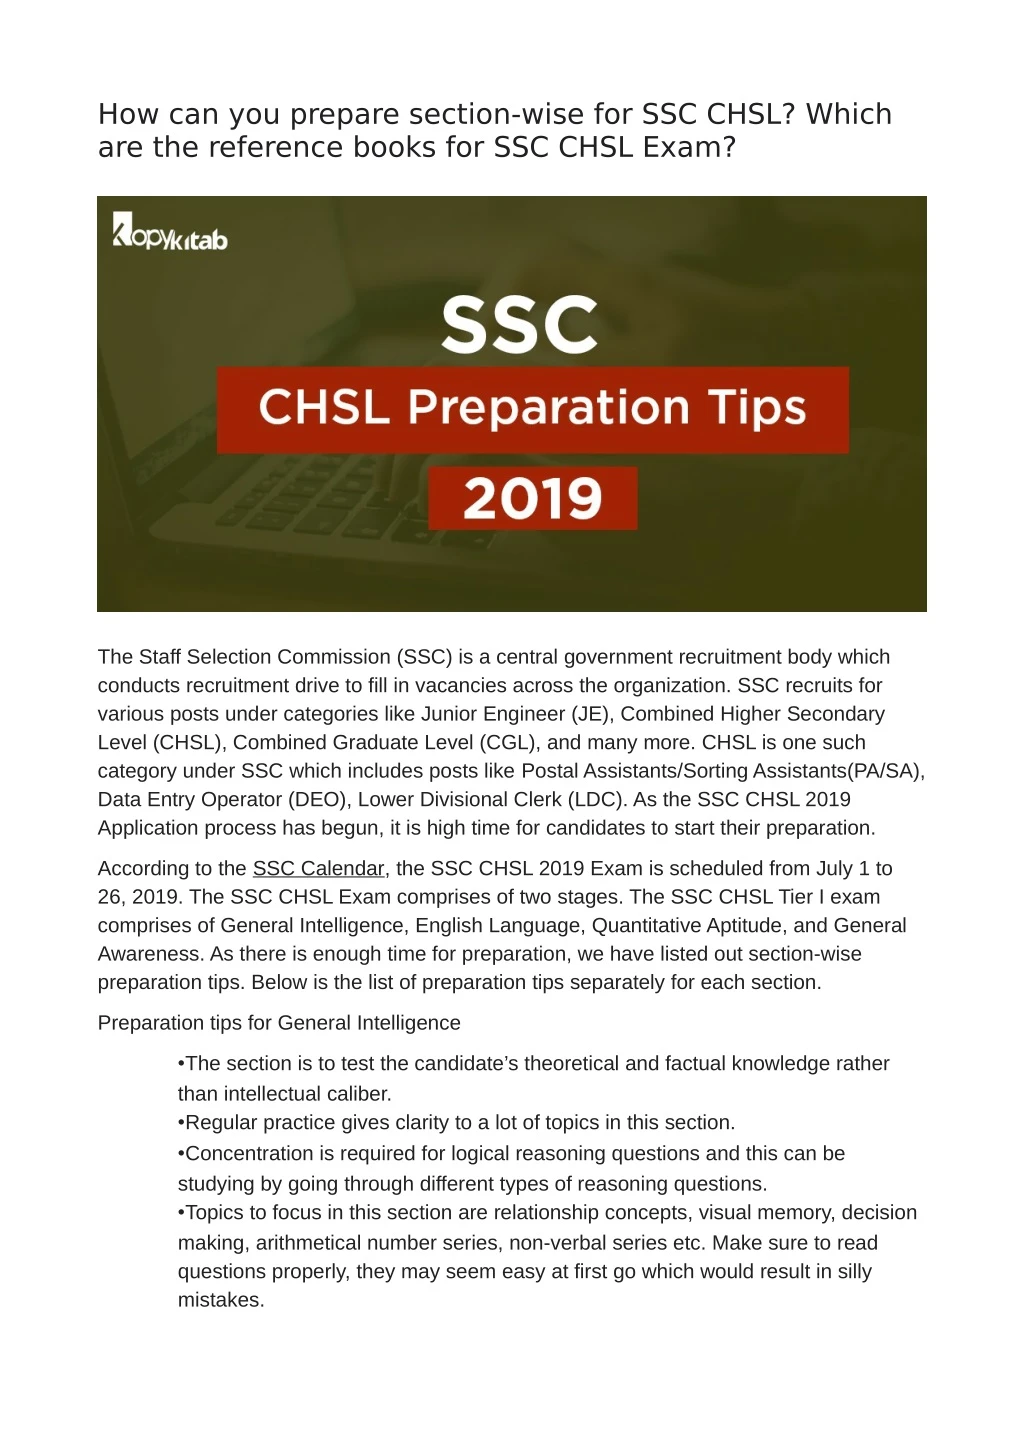 how can you prepare section wise for ssc chsl